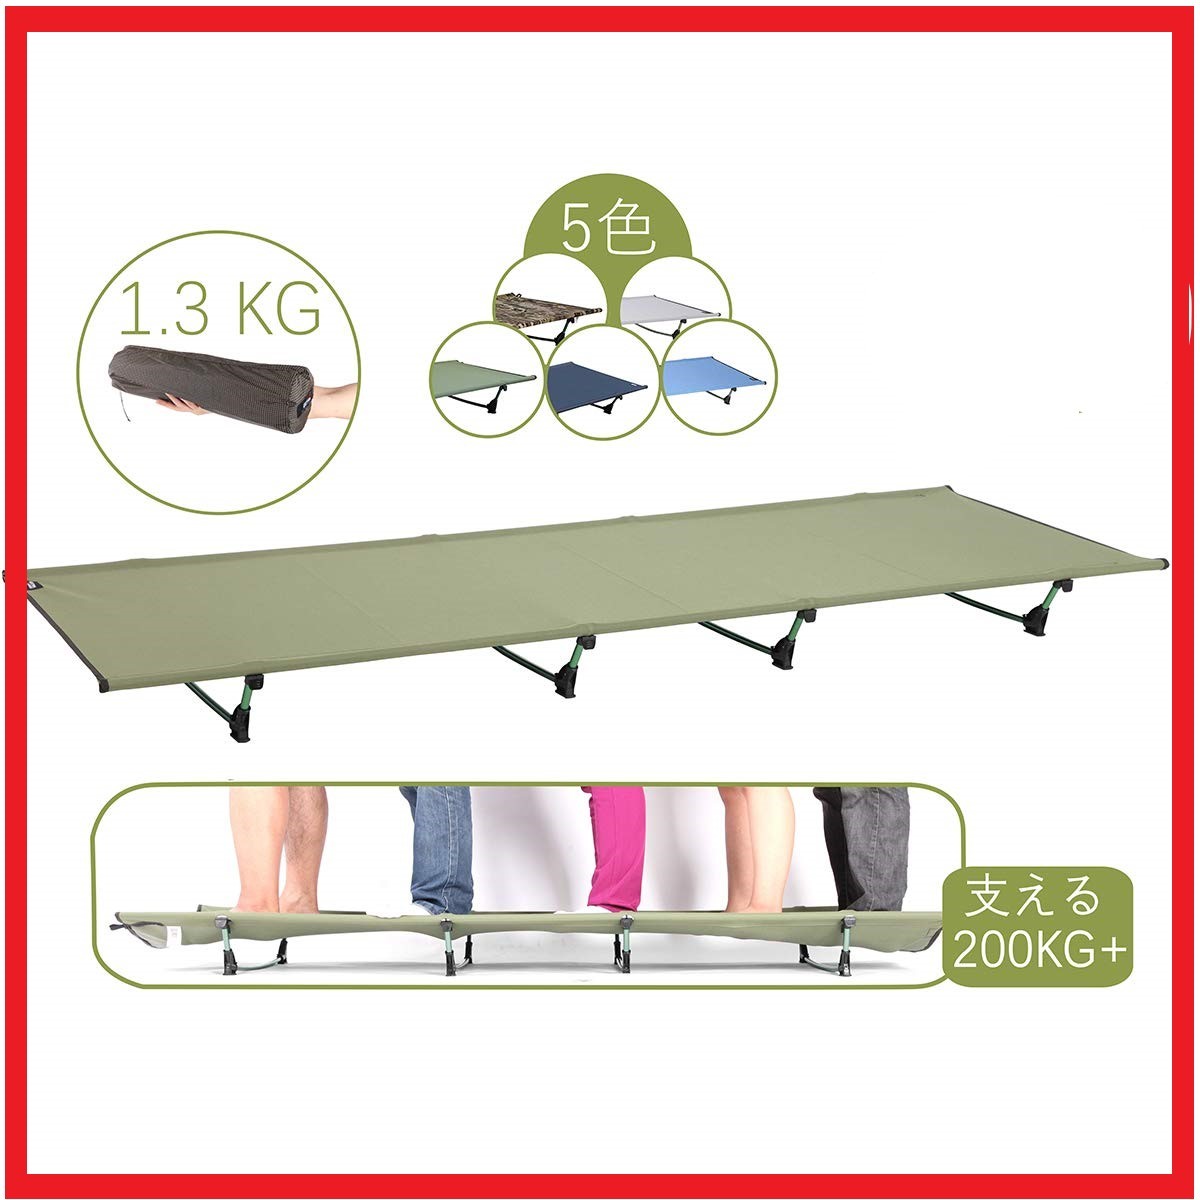 * new goods * unused * outdoor bed camp cot folding type bed camping bed light weight 1.3KG withstand load :200KG